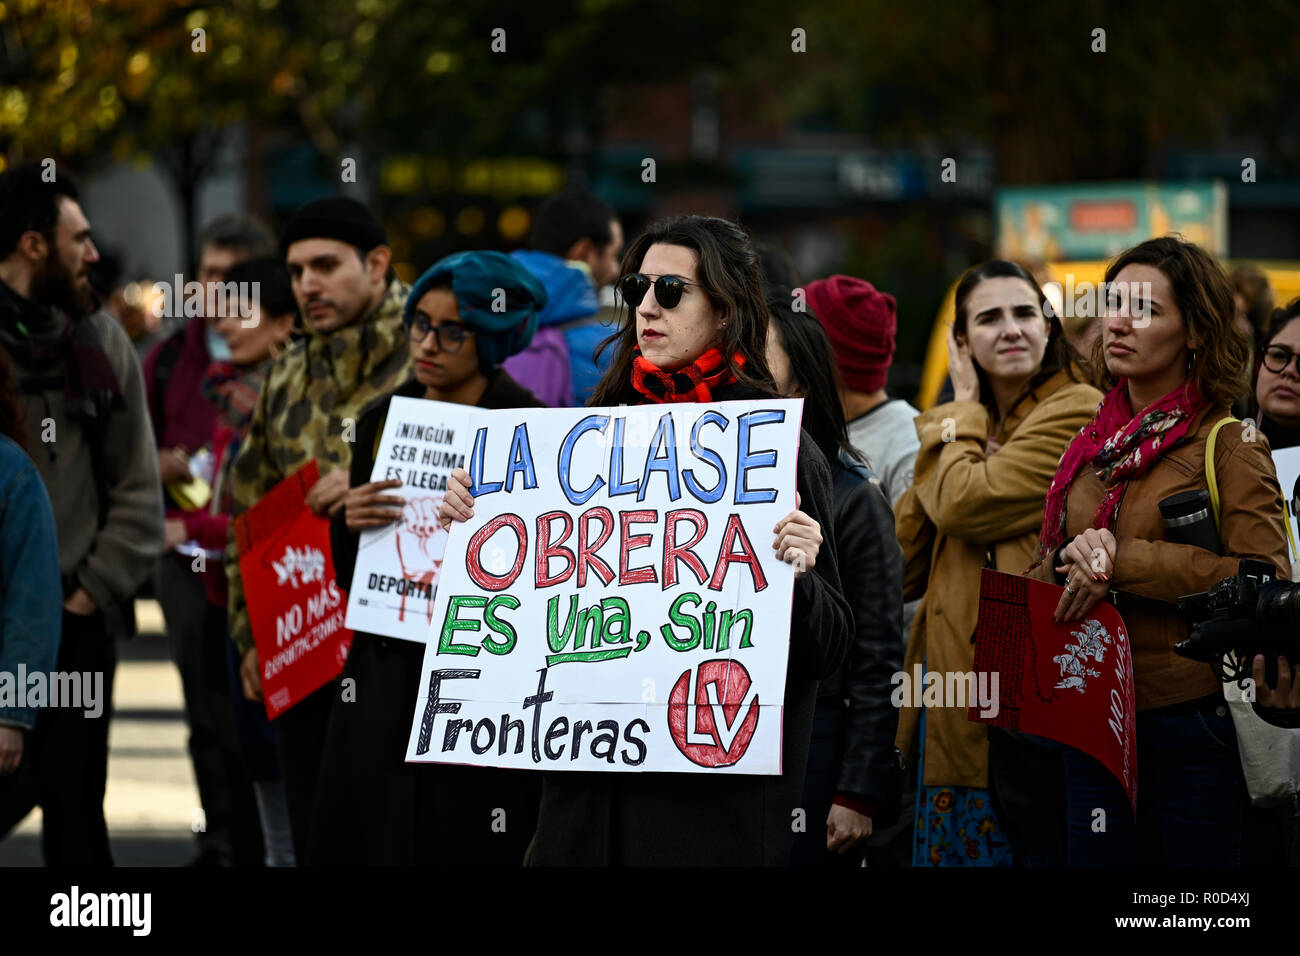 New York, U.S. 03 November 2018.  A woman holds a sign in Spanish reading 'The working class is one, without borders' as demonstrators protesting against Trump administration immigration policies rallied at Union Square.  The event, three days before the U.S. mid-term elections, was sponsored by several groups including NYC Democratic Socialists of America and the International Socialist Organization. Credit: Joseph Reid/Alamy Live News Stock Photo